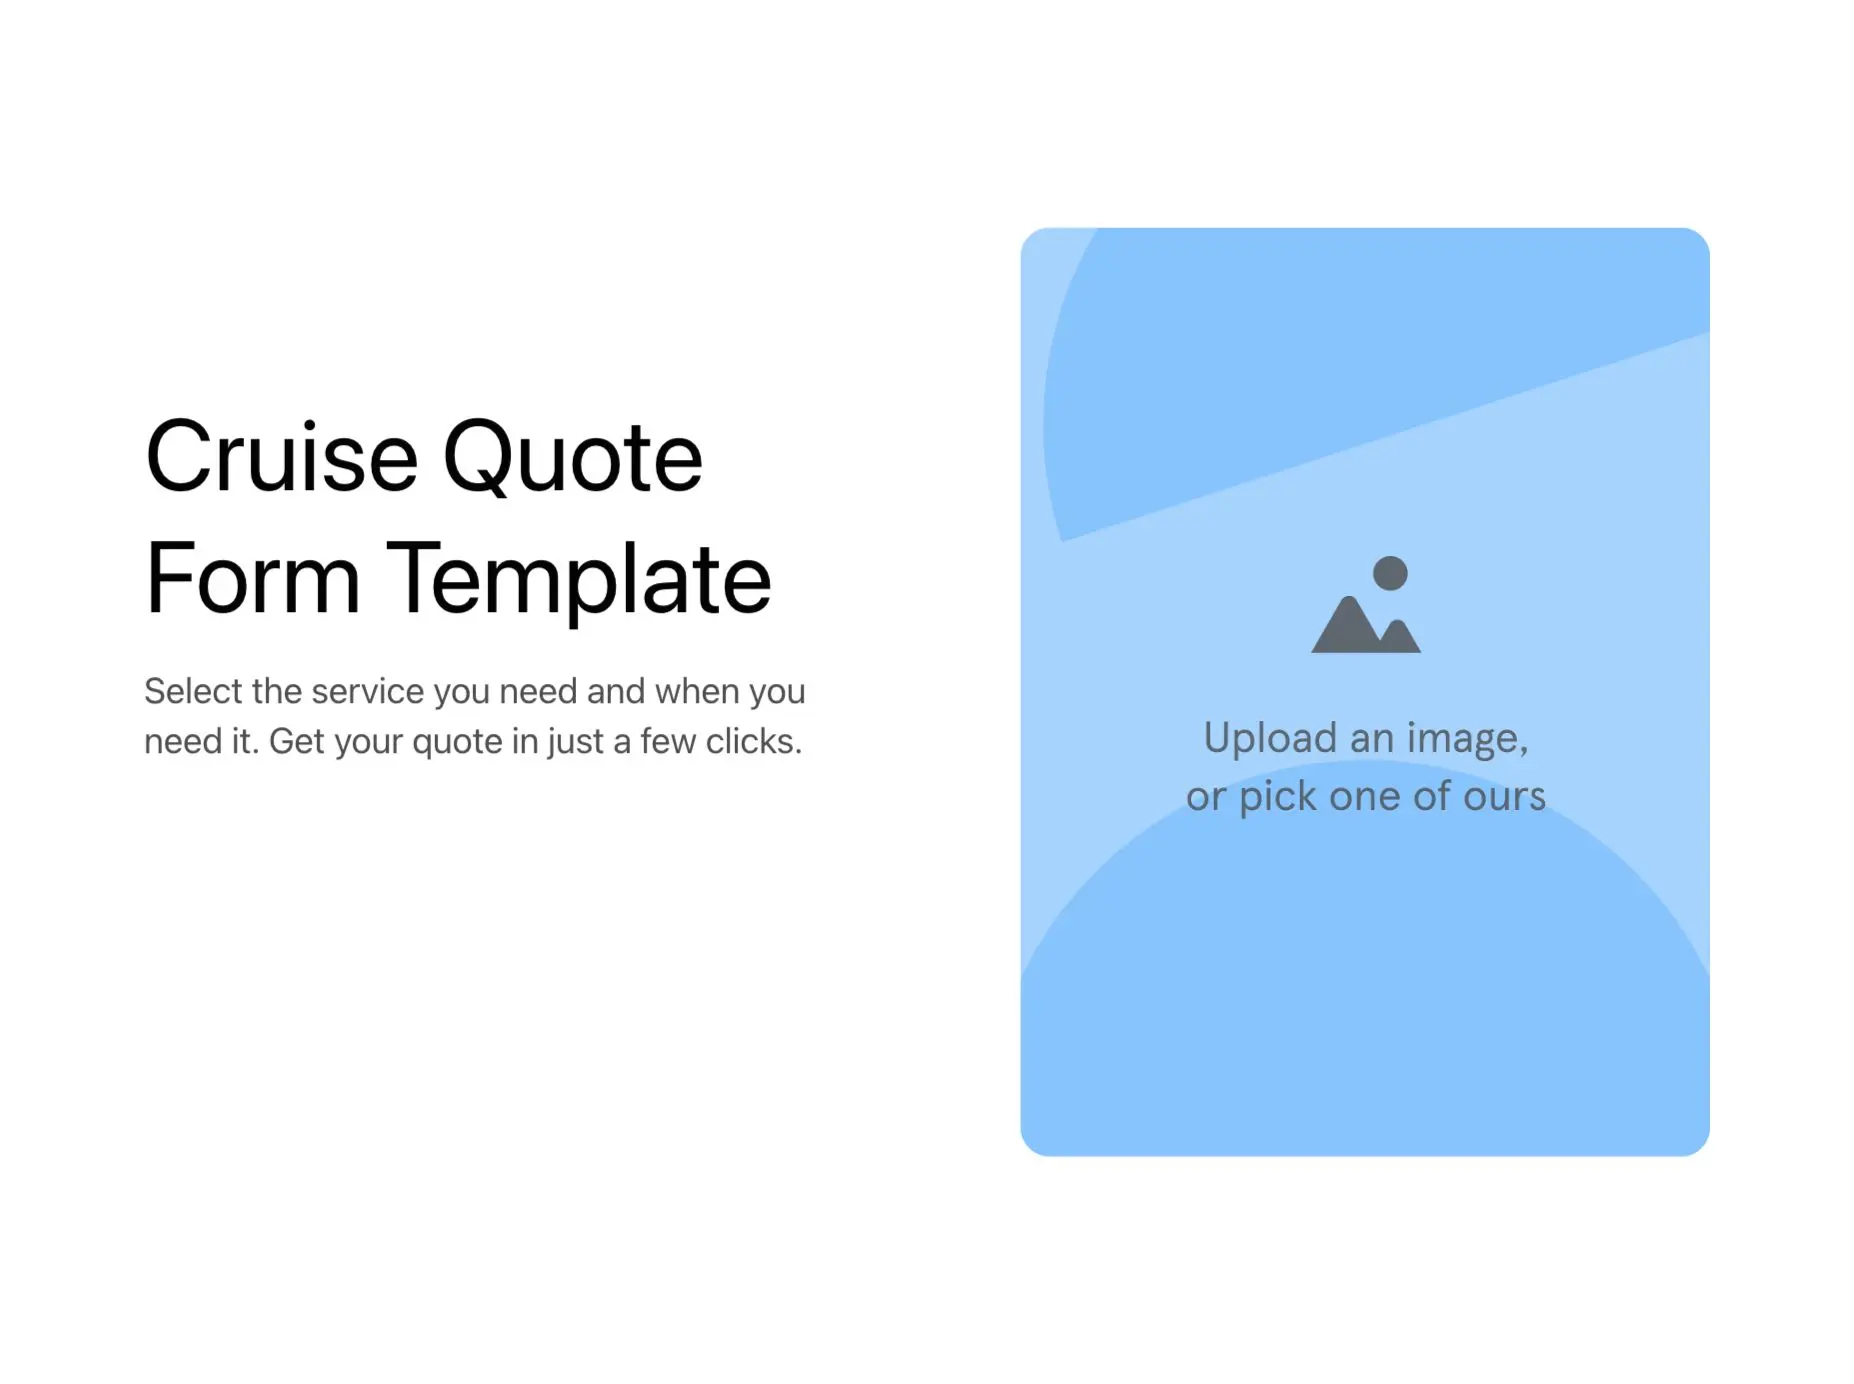 Cruise Quote Form Template Hero